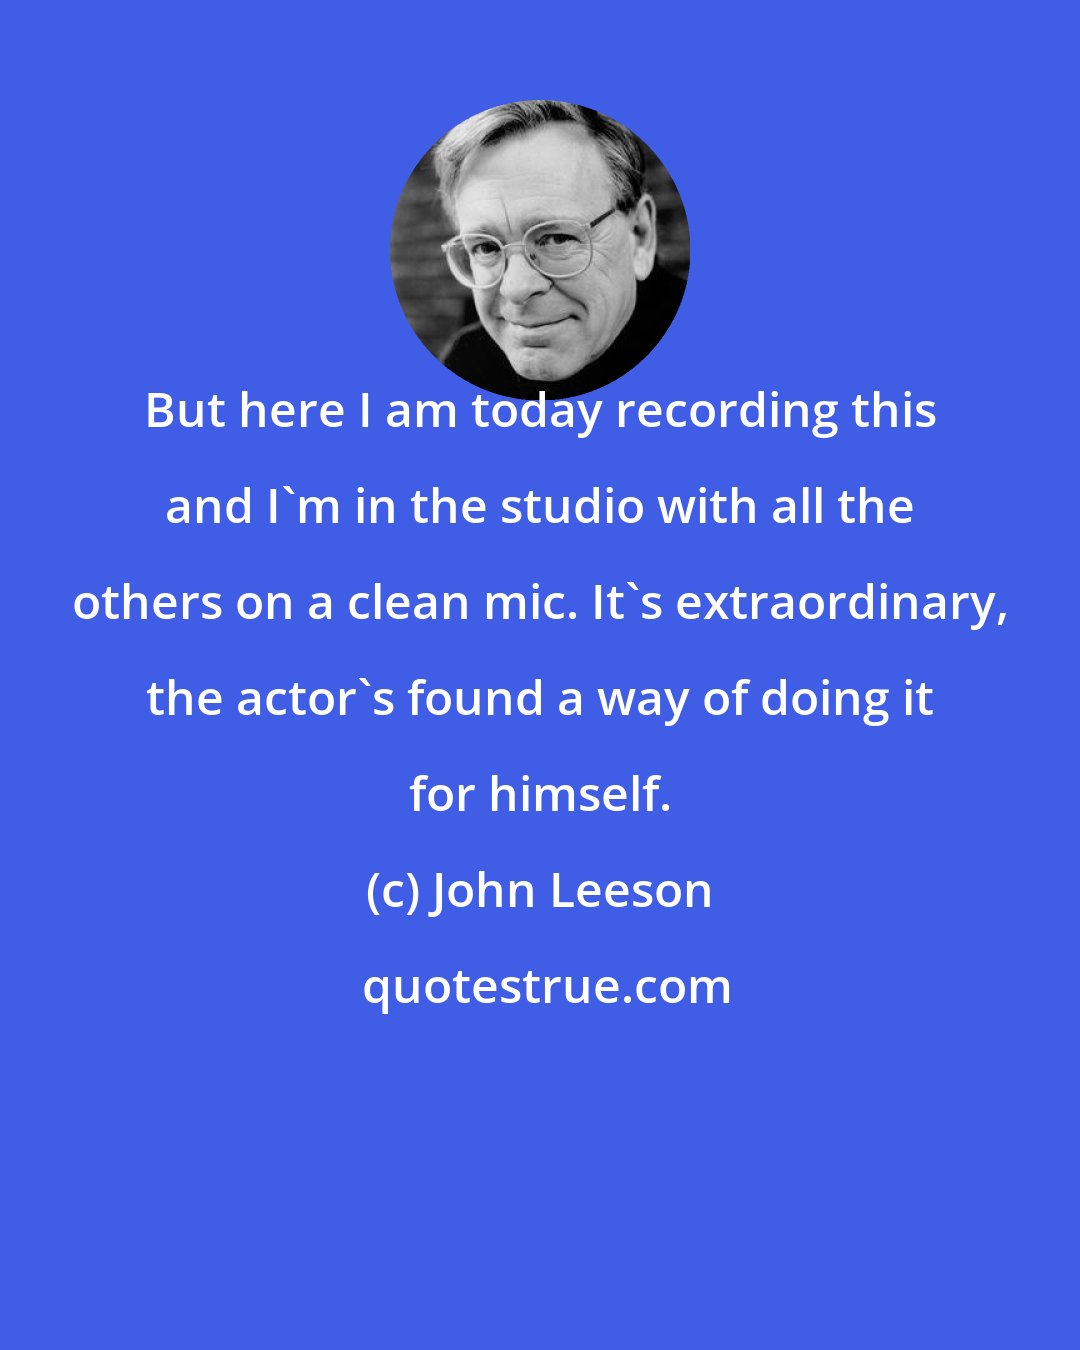 John Leeson: But here I am today recording this and I'm in the studio with all the others on a clean mic. It's extraordinary, the actor's found a way of doing it for himself.